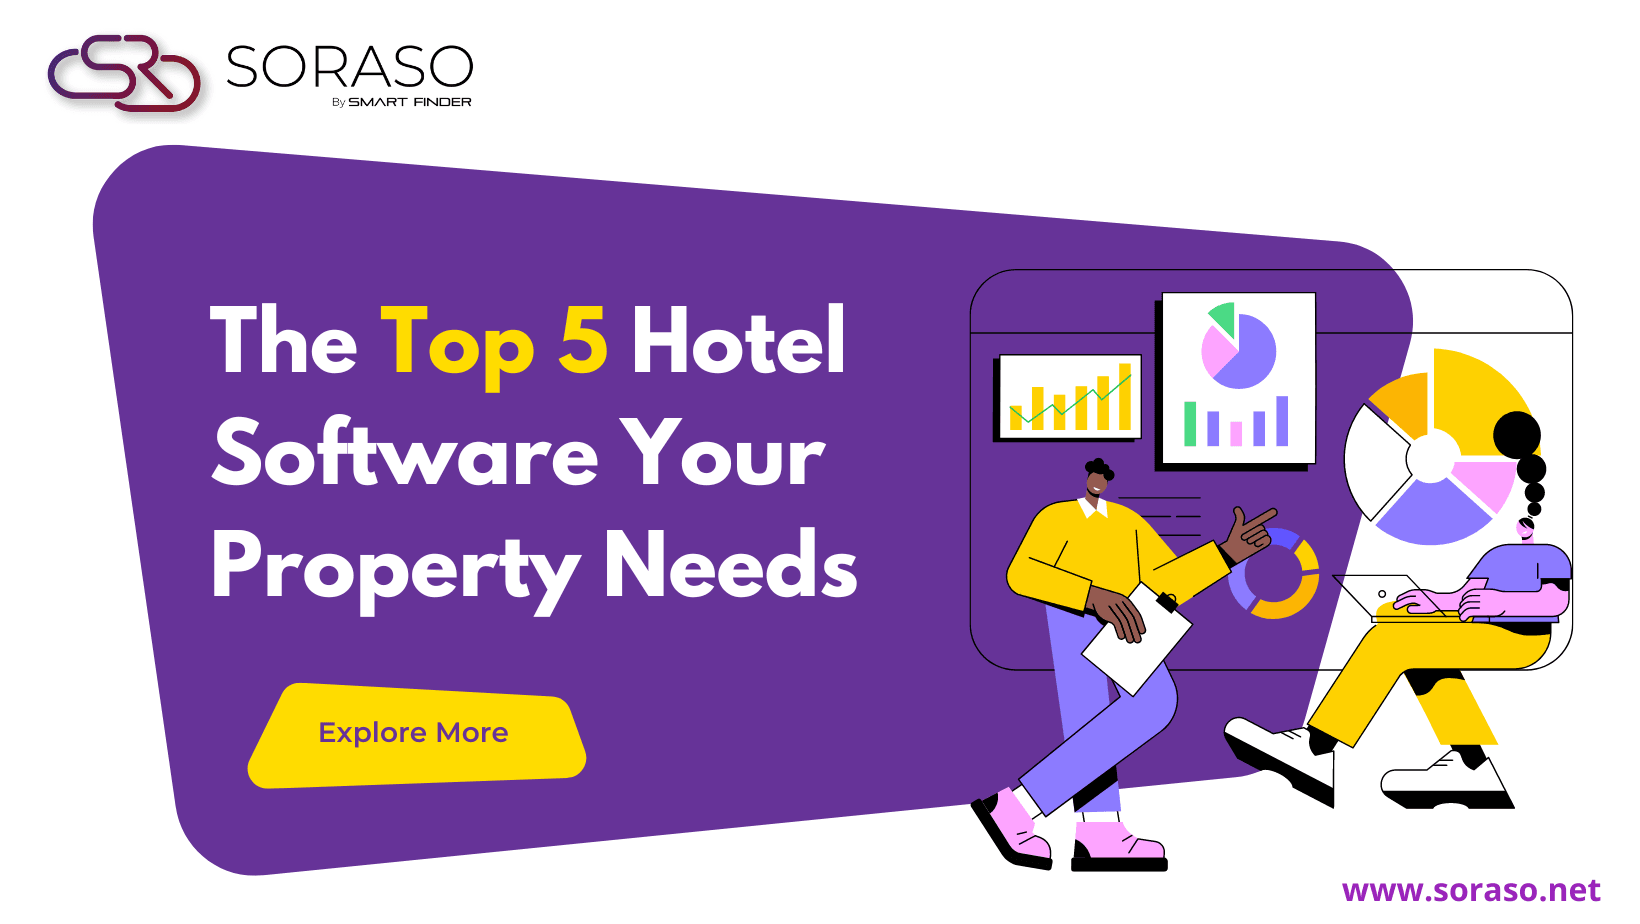 The Top 5 Hotel Software Your Property Needs